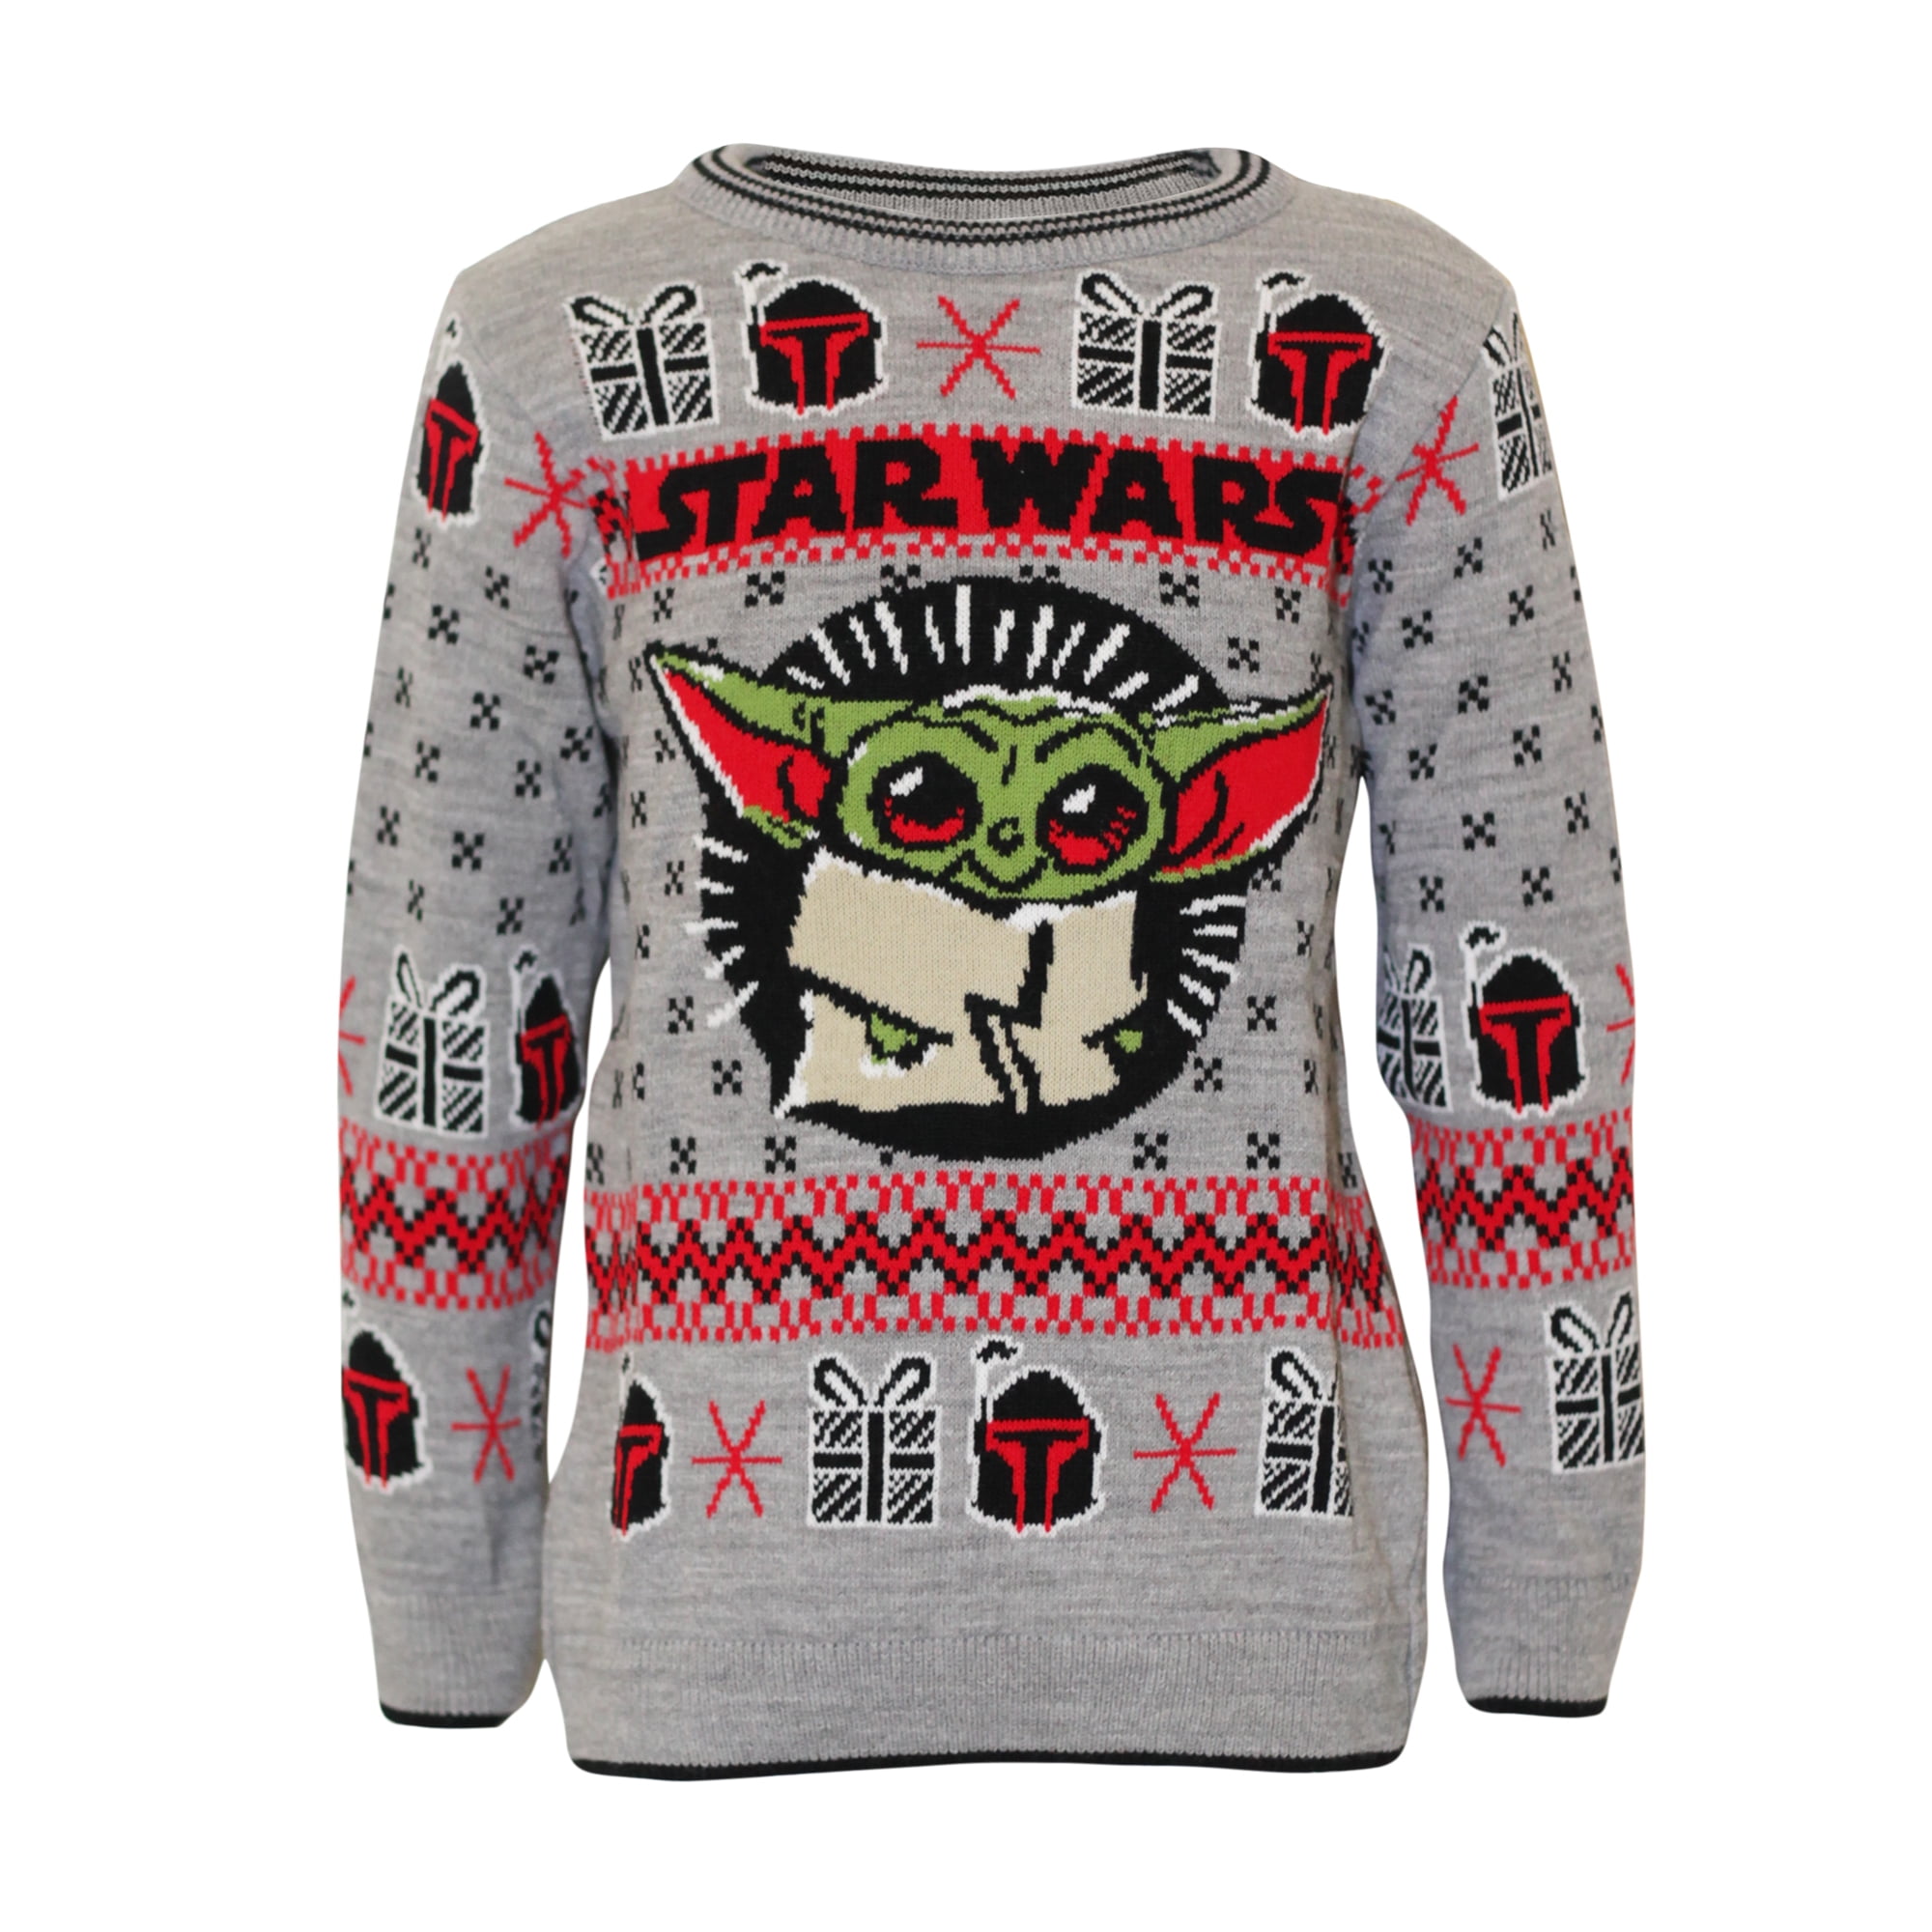 Official Merchandise Star Wars The Mandalorian The Child Christmas Boys Knitted Jumper Baby Yoda Xmas Jumper Ugly Sweater Fair Isle